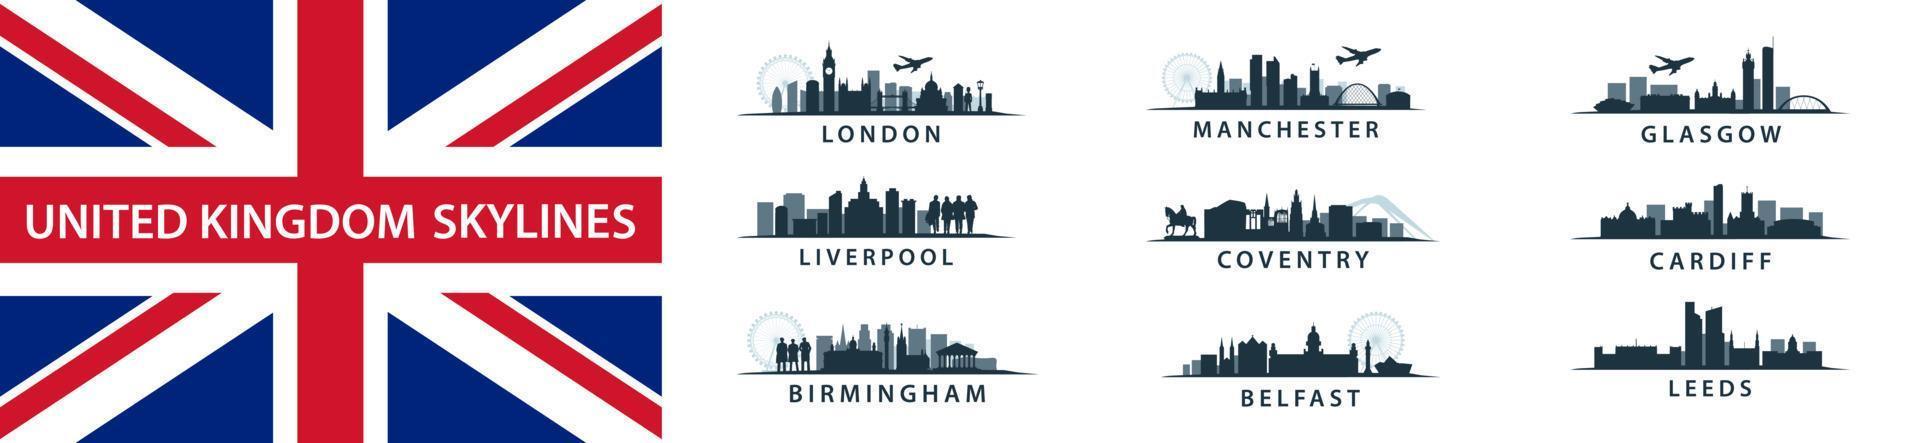 UK Cities Collection, skylines set in vector sihouettes, english destinations like London, Leeds, Coventry, Birmingham, Liverpool, Belfast, Cardiff, Glasgow